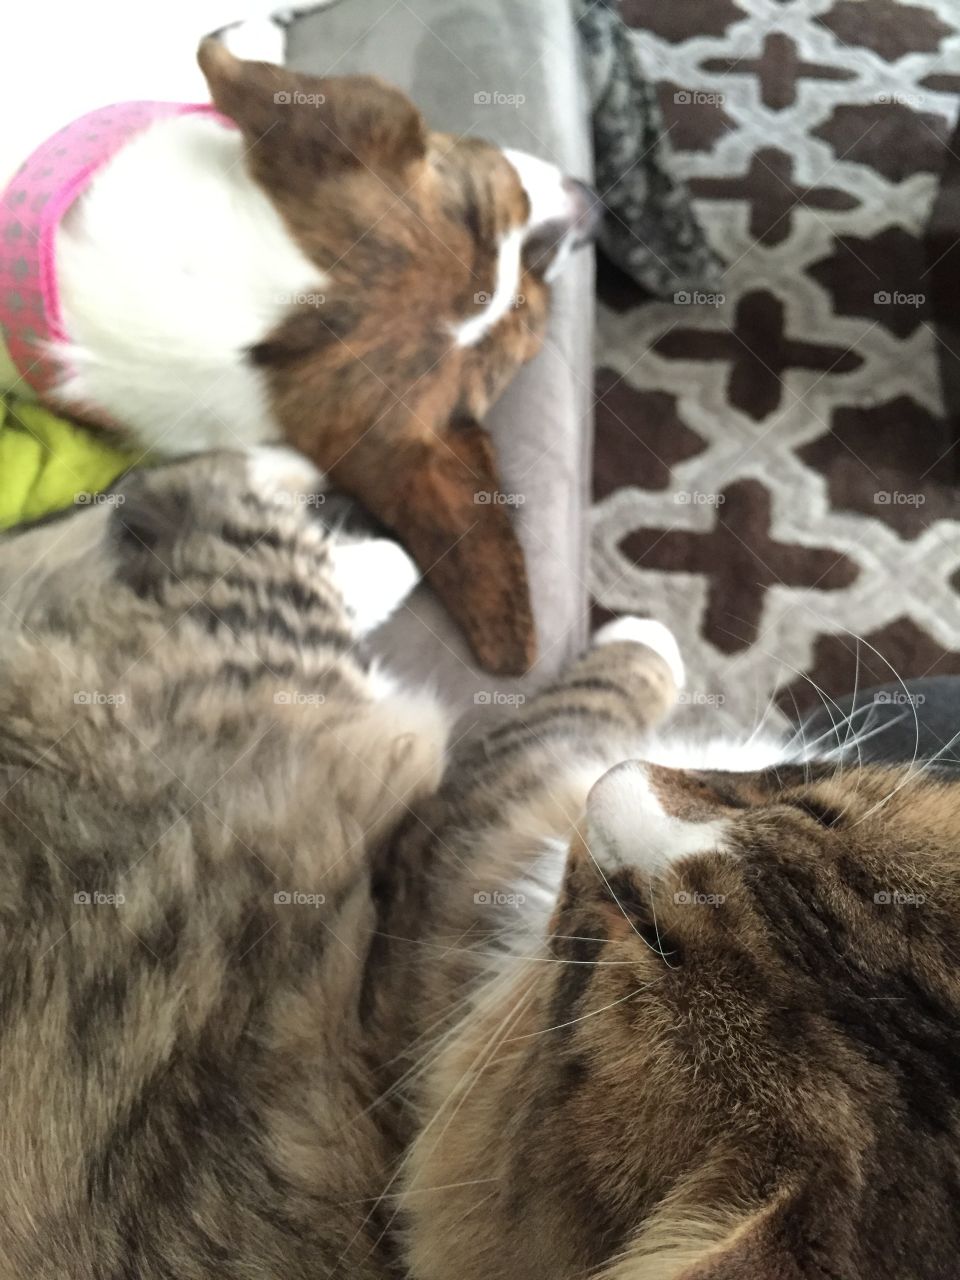 An overhead view of Leia the dog and Oscar the cat cuddling